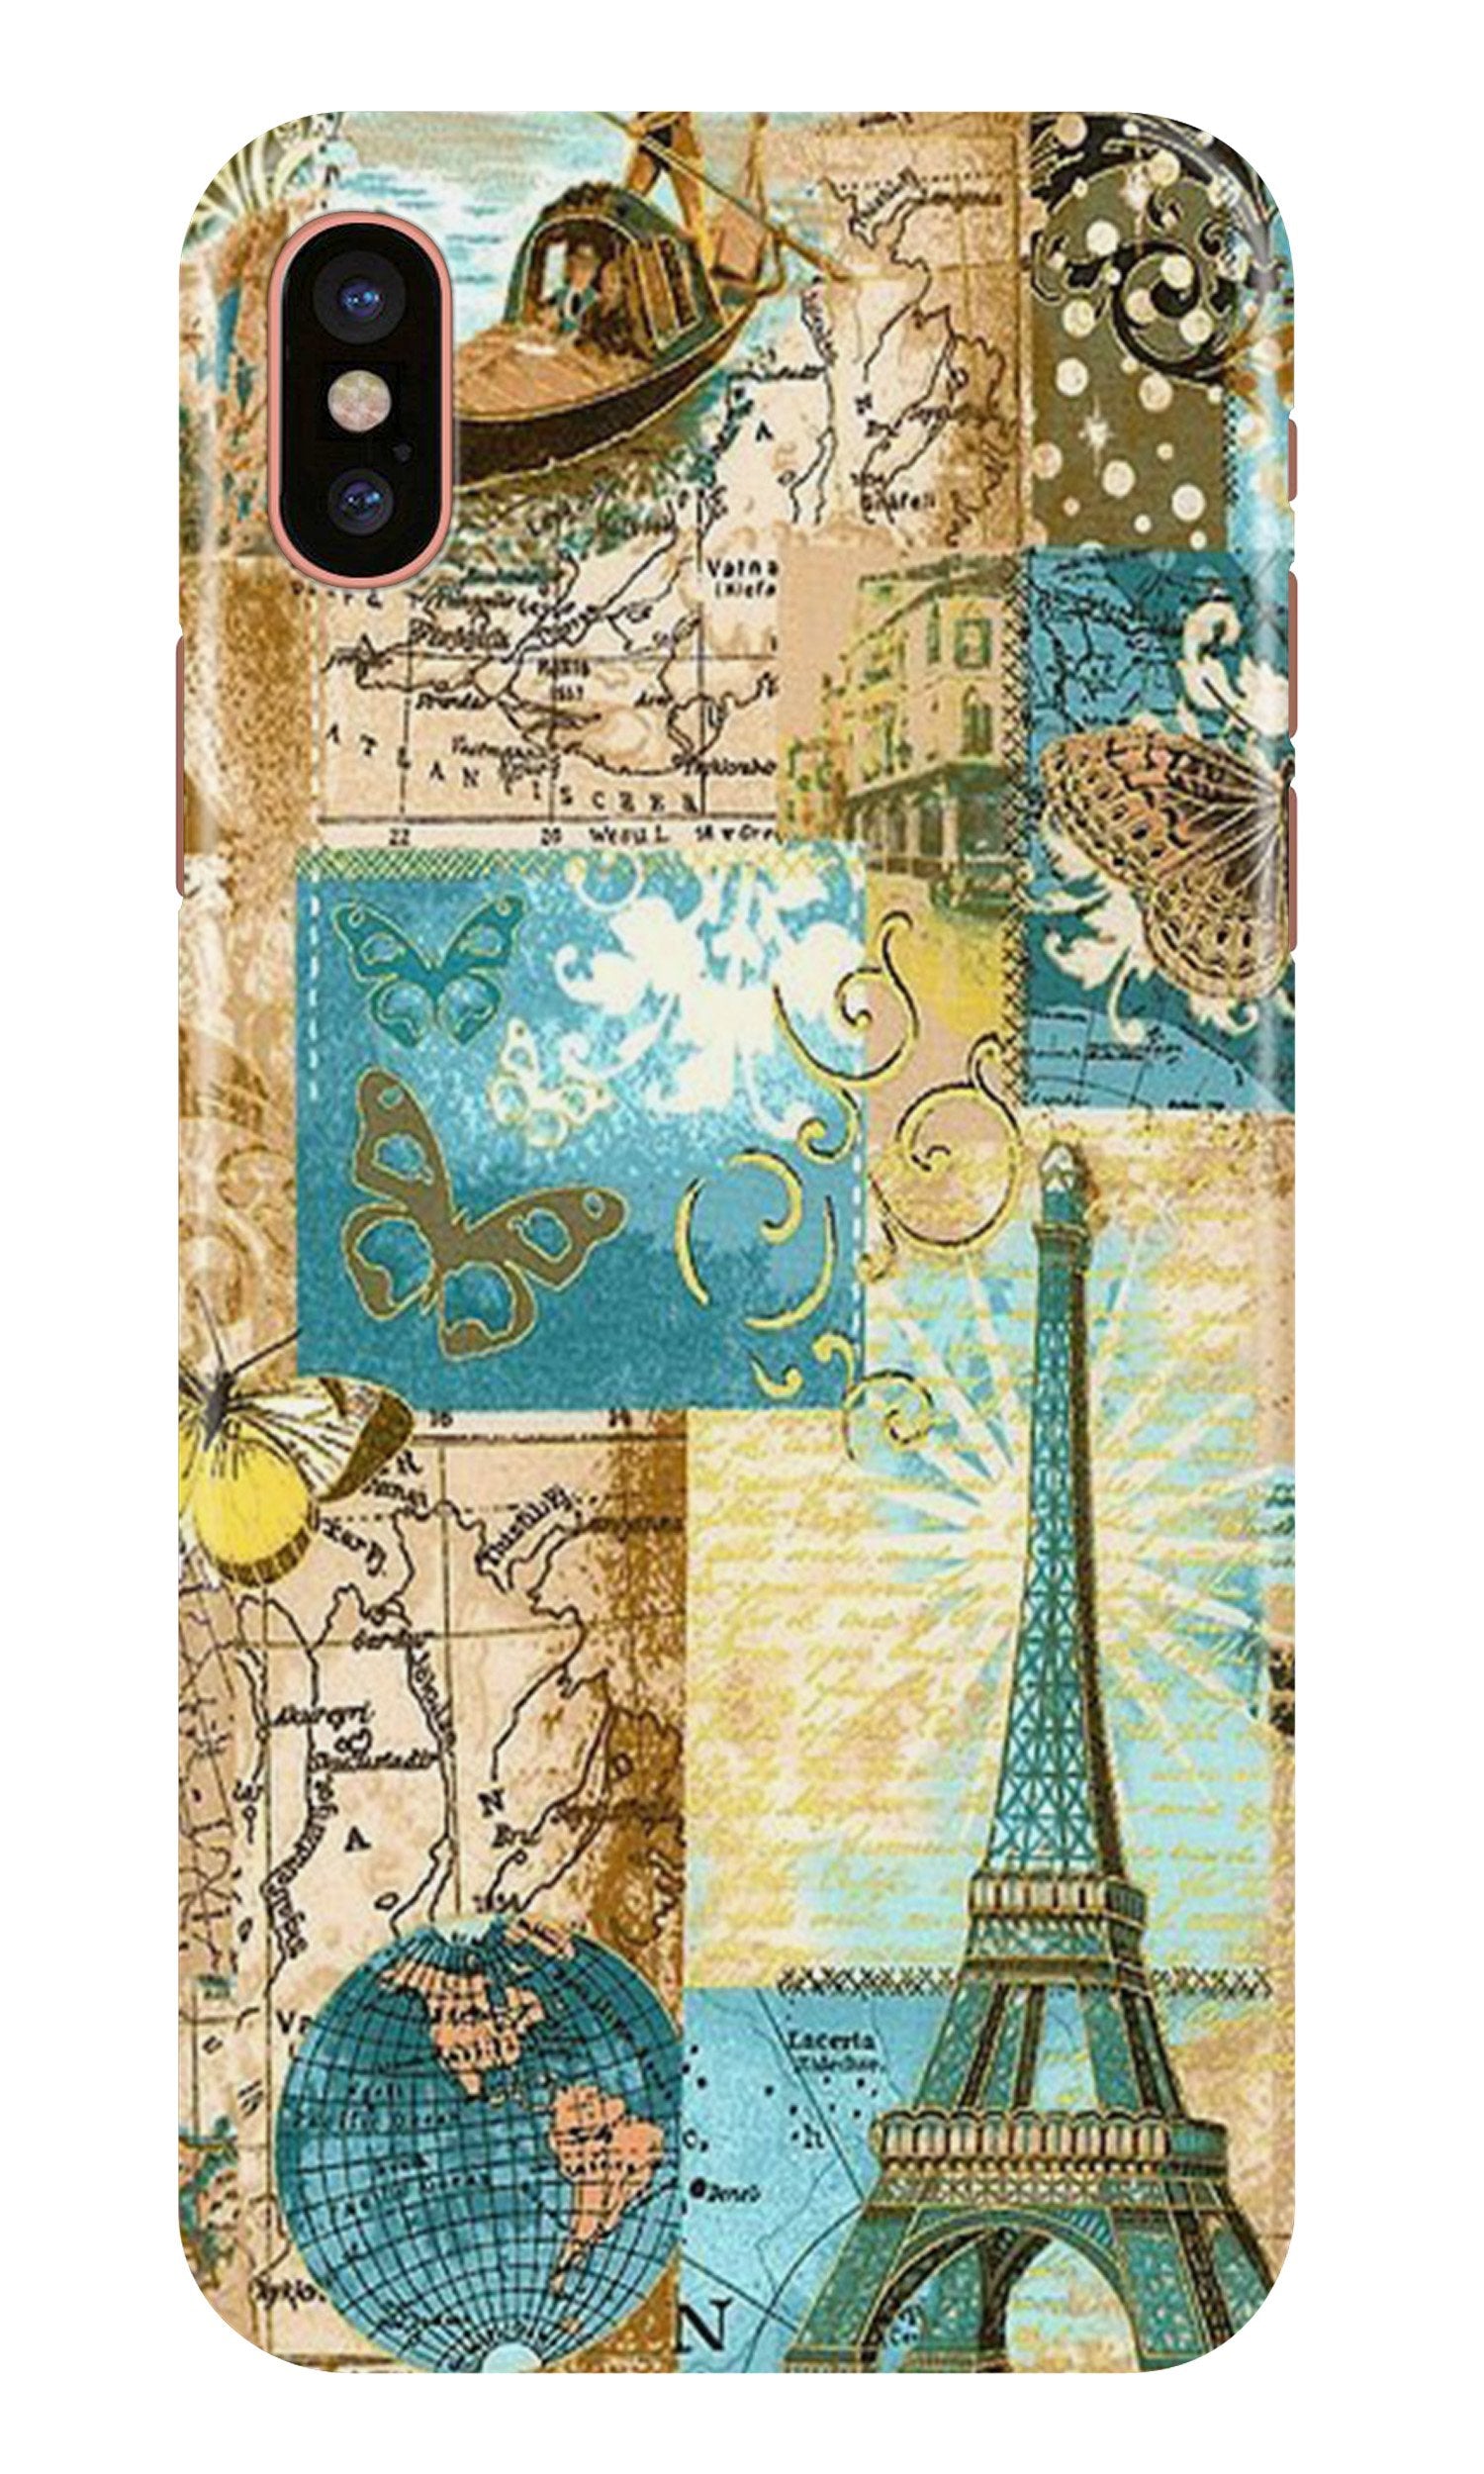 Travel Eiffel Tower Case for iPhone Xr (Design No. 206)